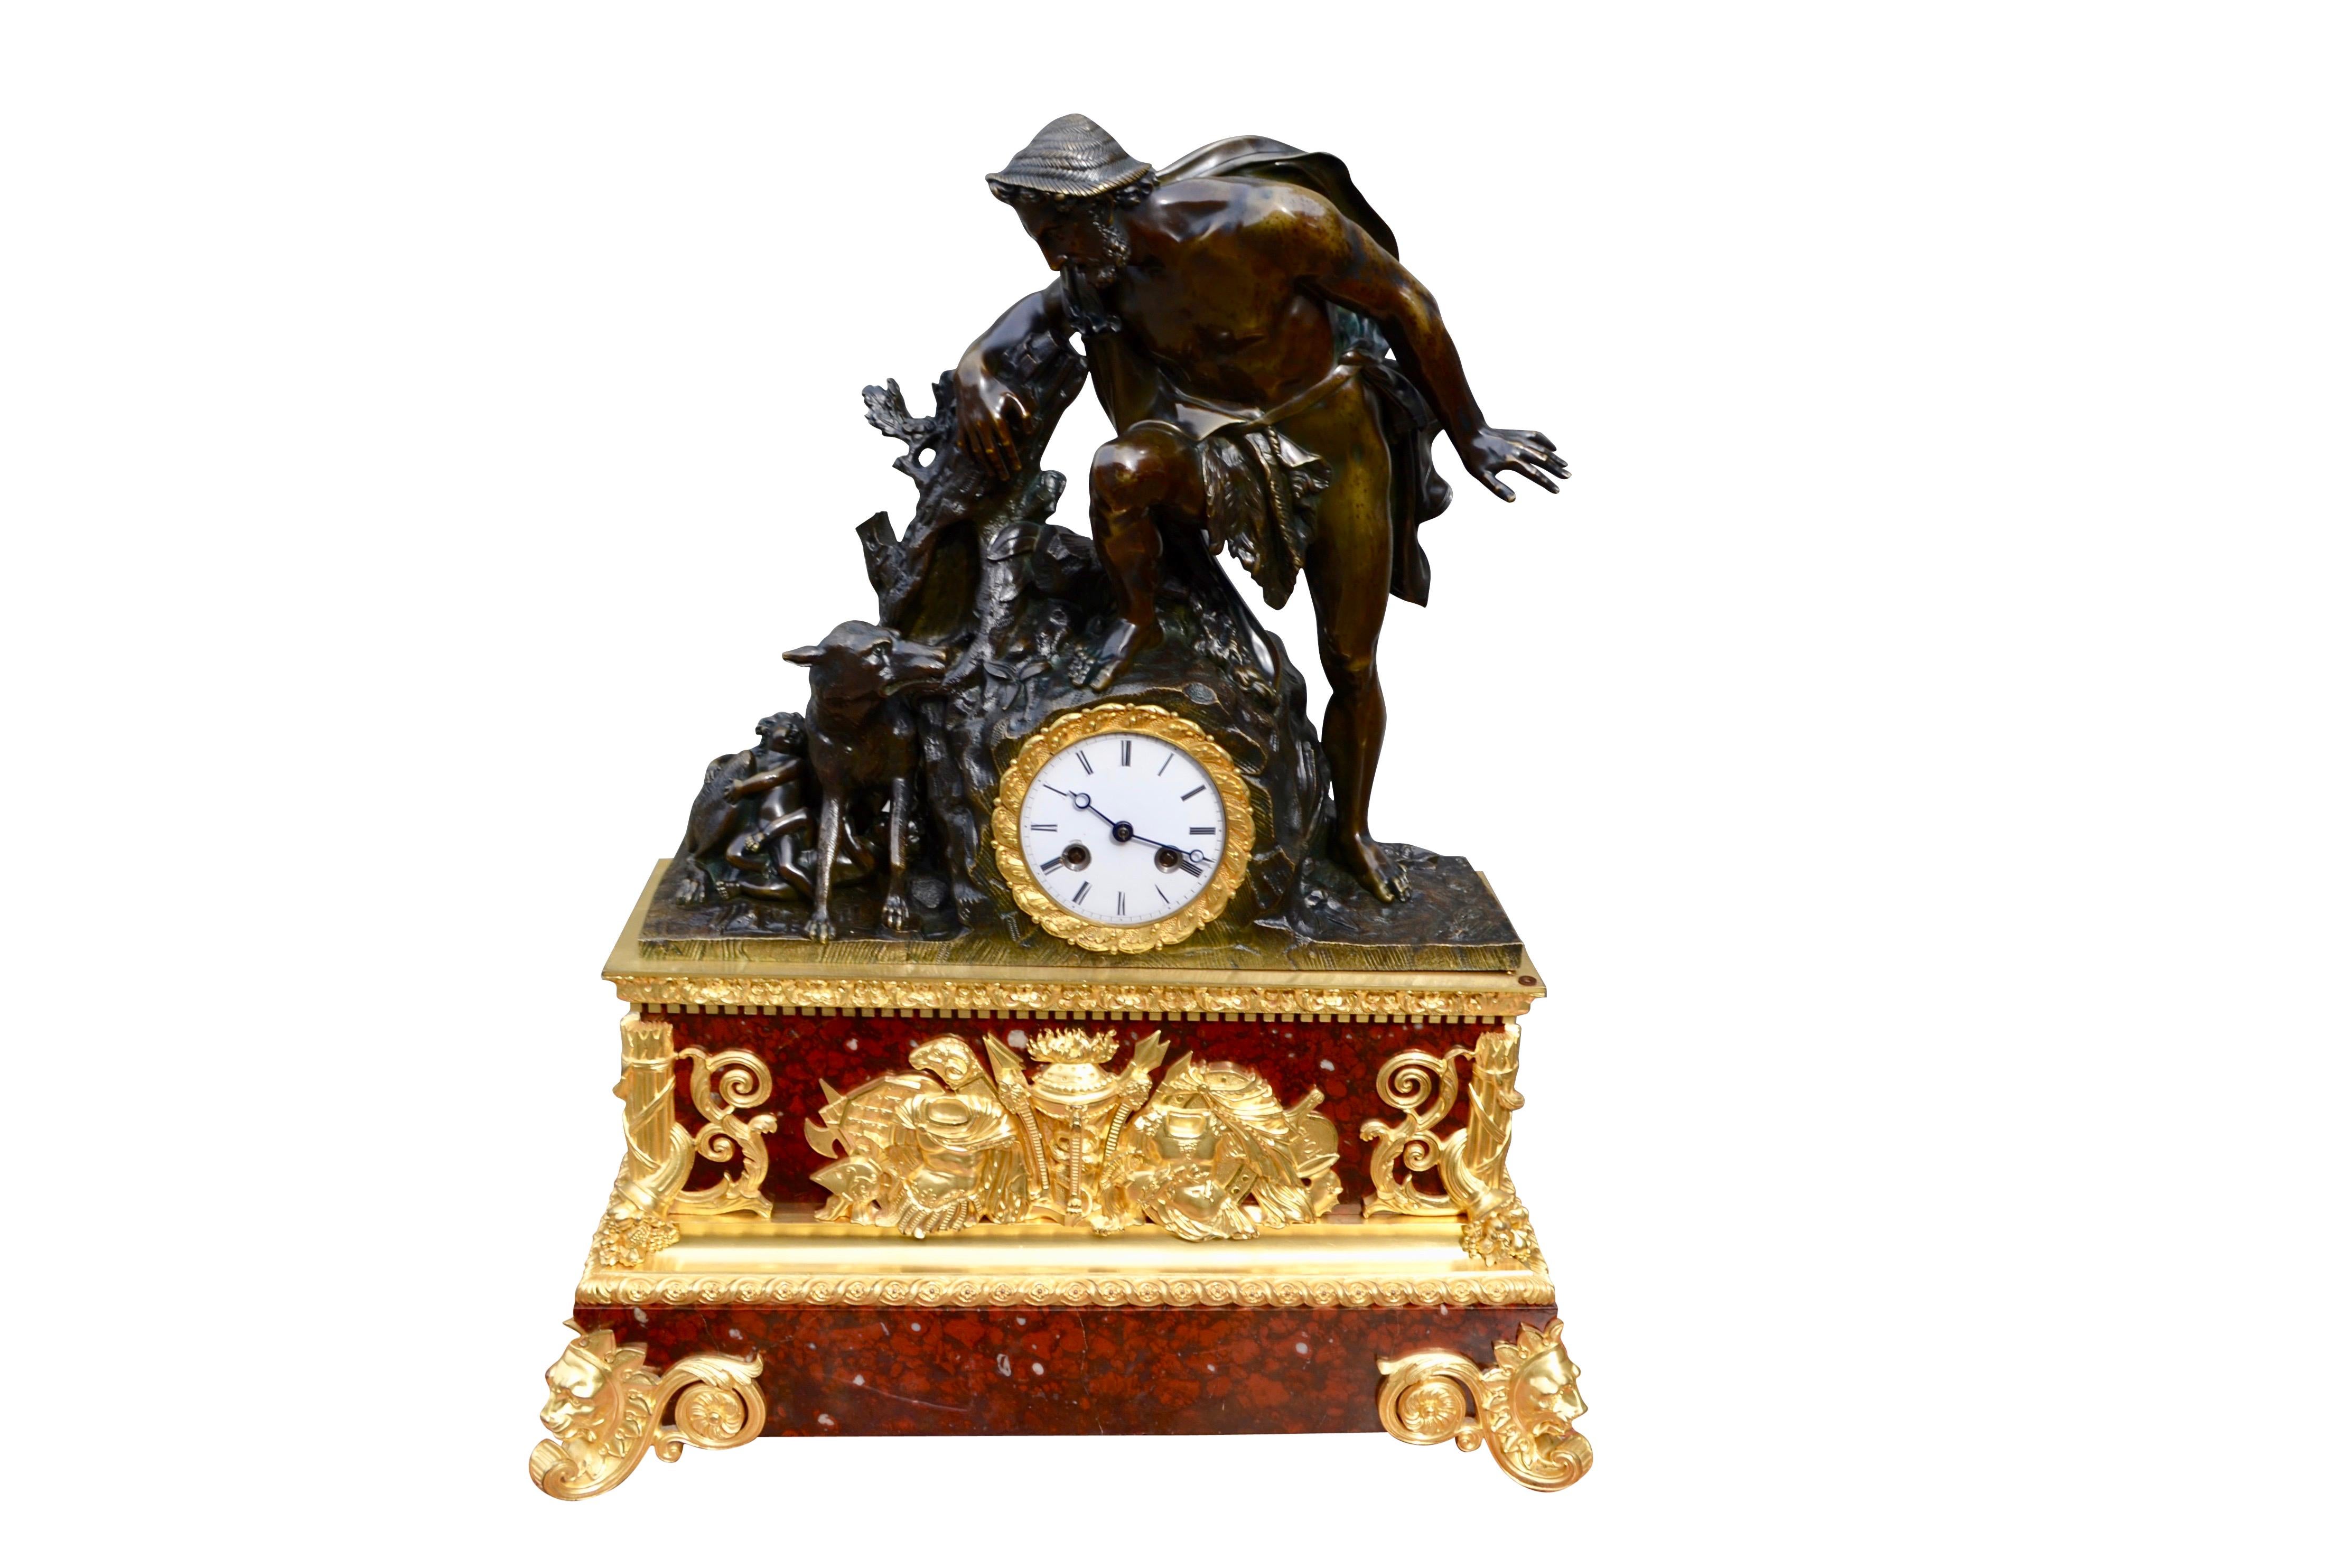 The highest quality late French Empire/Charles X mantle clock in terms of bronze casting, chasing, and gilding. The partially clad figure of Faustulus leans into a rocky outcrop peering down into the startled face of the she-wolf Lupa who is